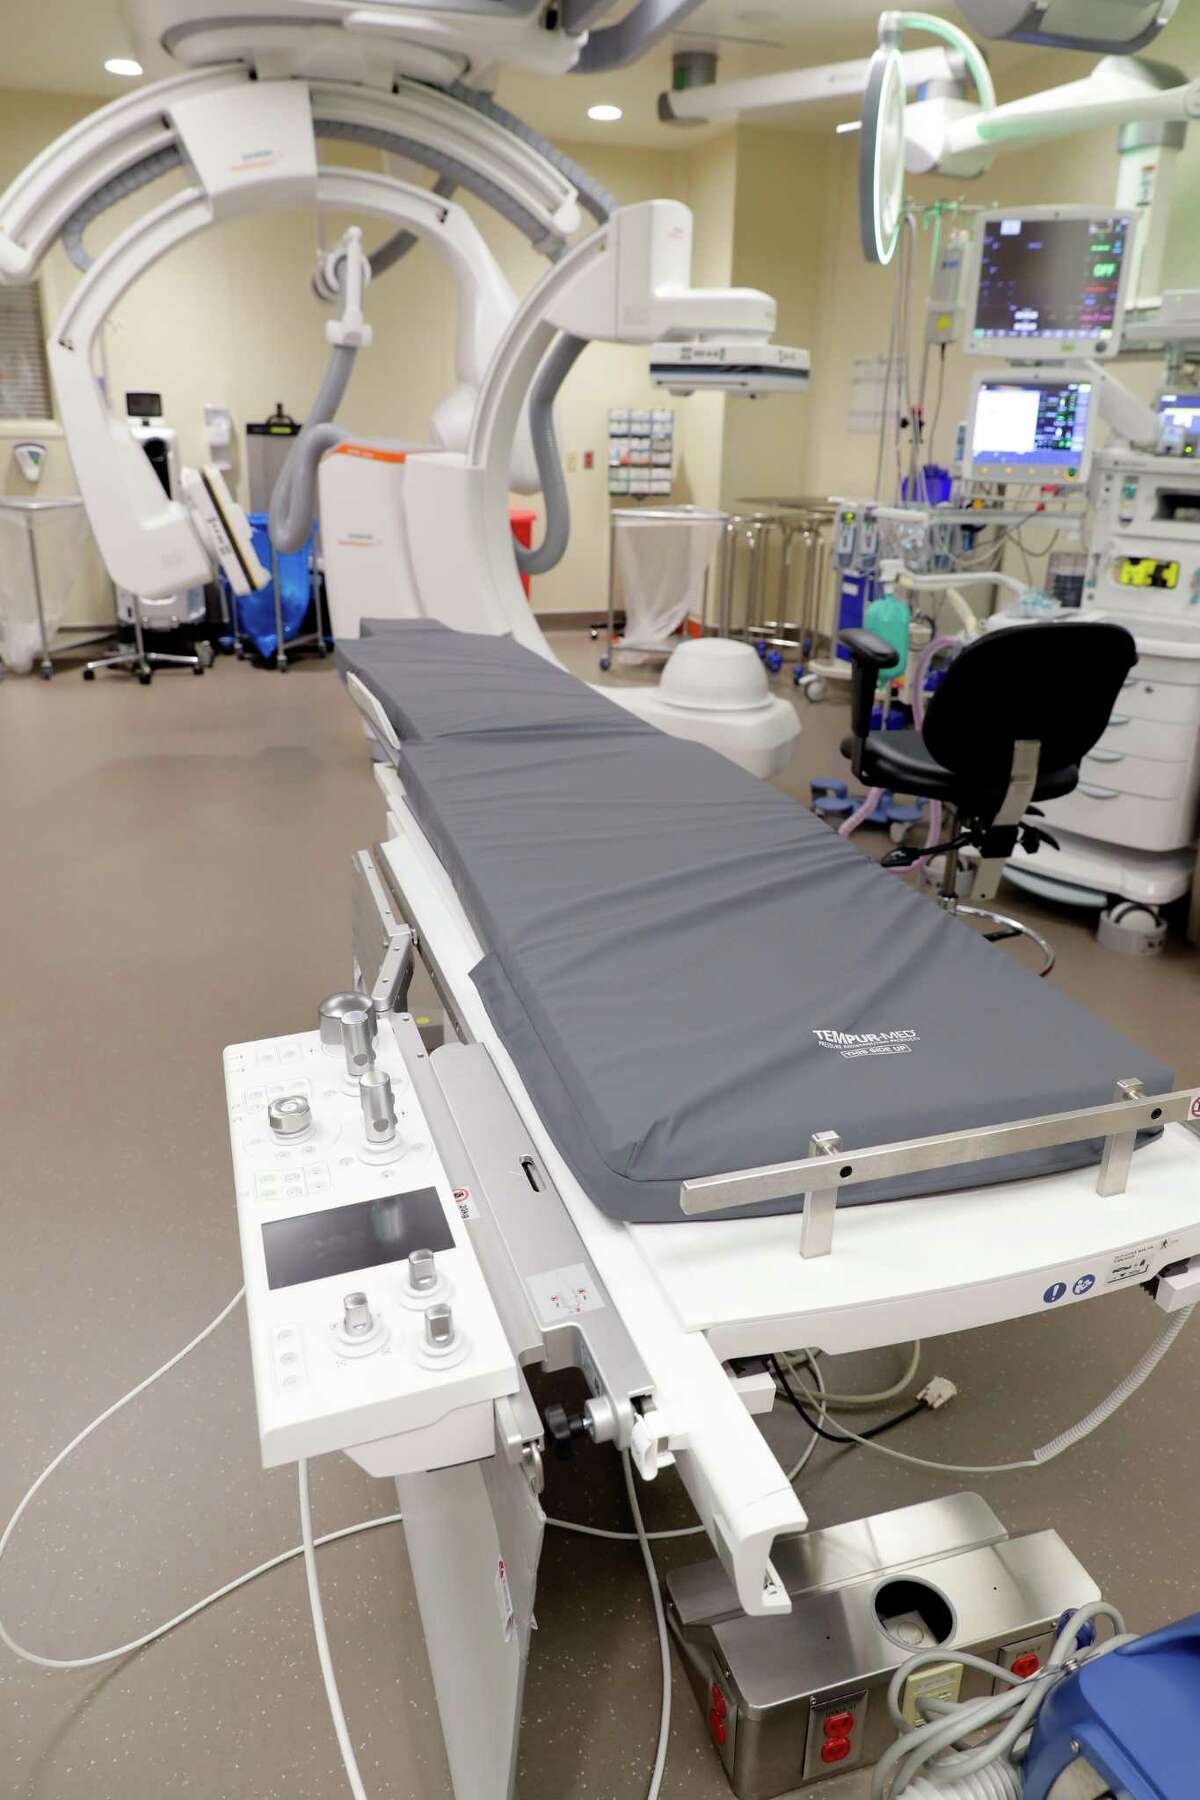 One of the three hybrid operating rooms, with dual plane (3D) xray machines used for an array of various surgical procedures during a tour of the Healing Tower, a new space at Houston Methodist The Woodlands Hospital Wednesday, April 13, 2022 in The Woodlands, TX.